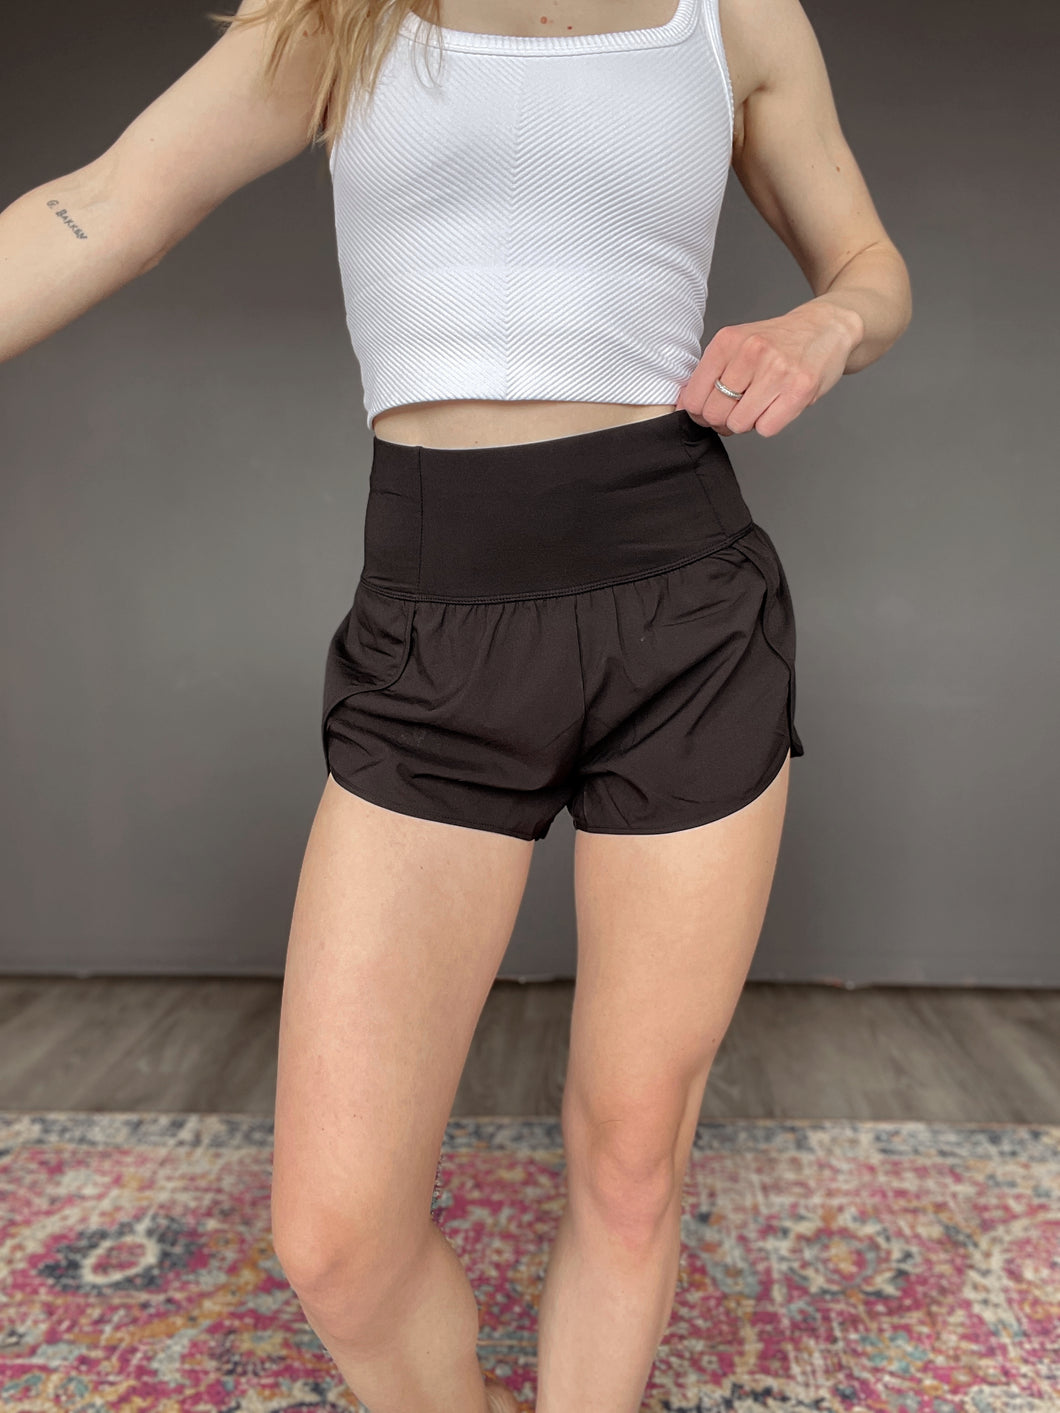 Athleisure Shorts - 2 Colors